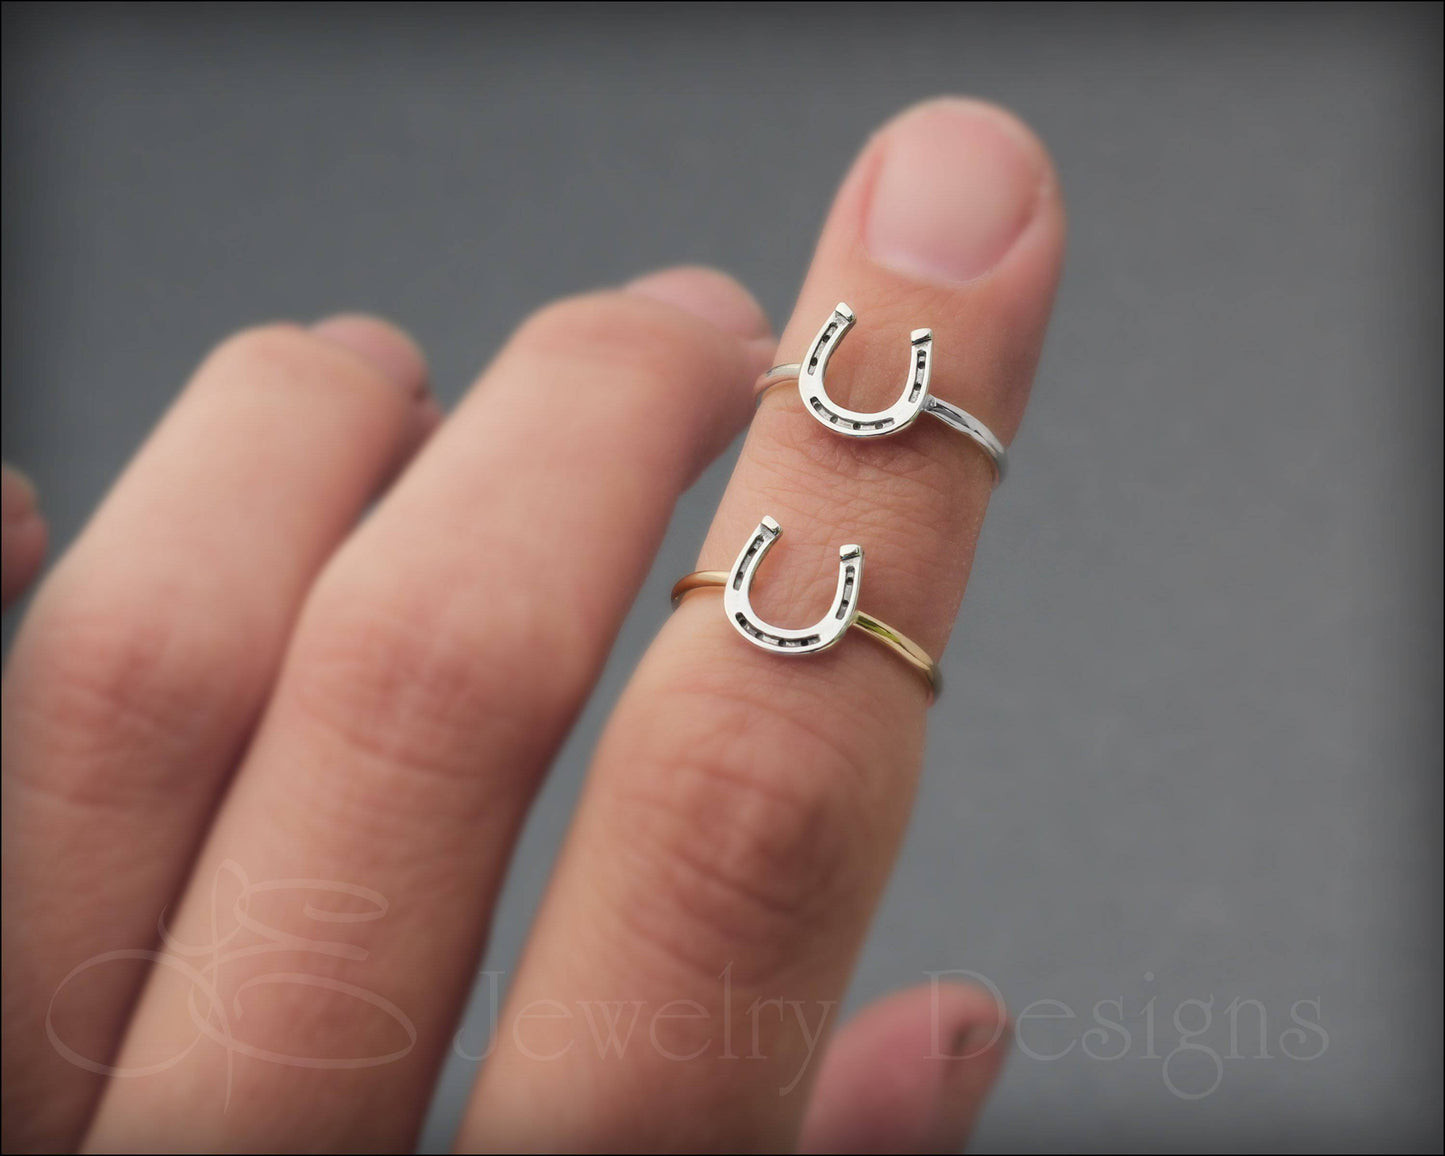 Load image into Gallery viewer, Horseshoe Ring - LE Jewelry Designs
